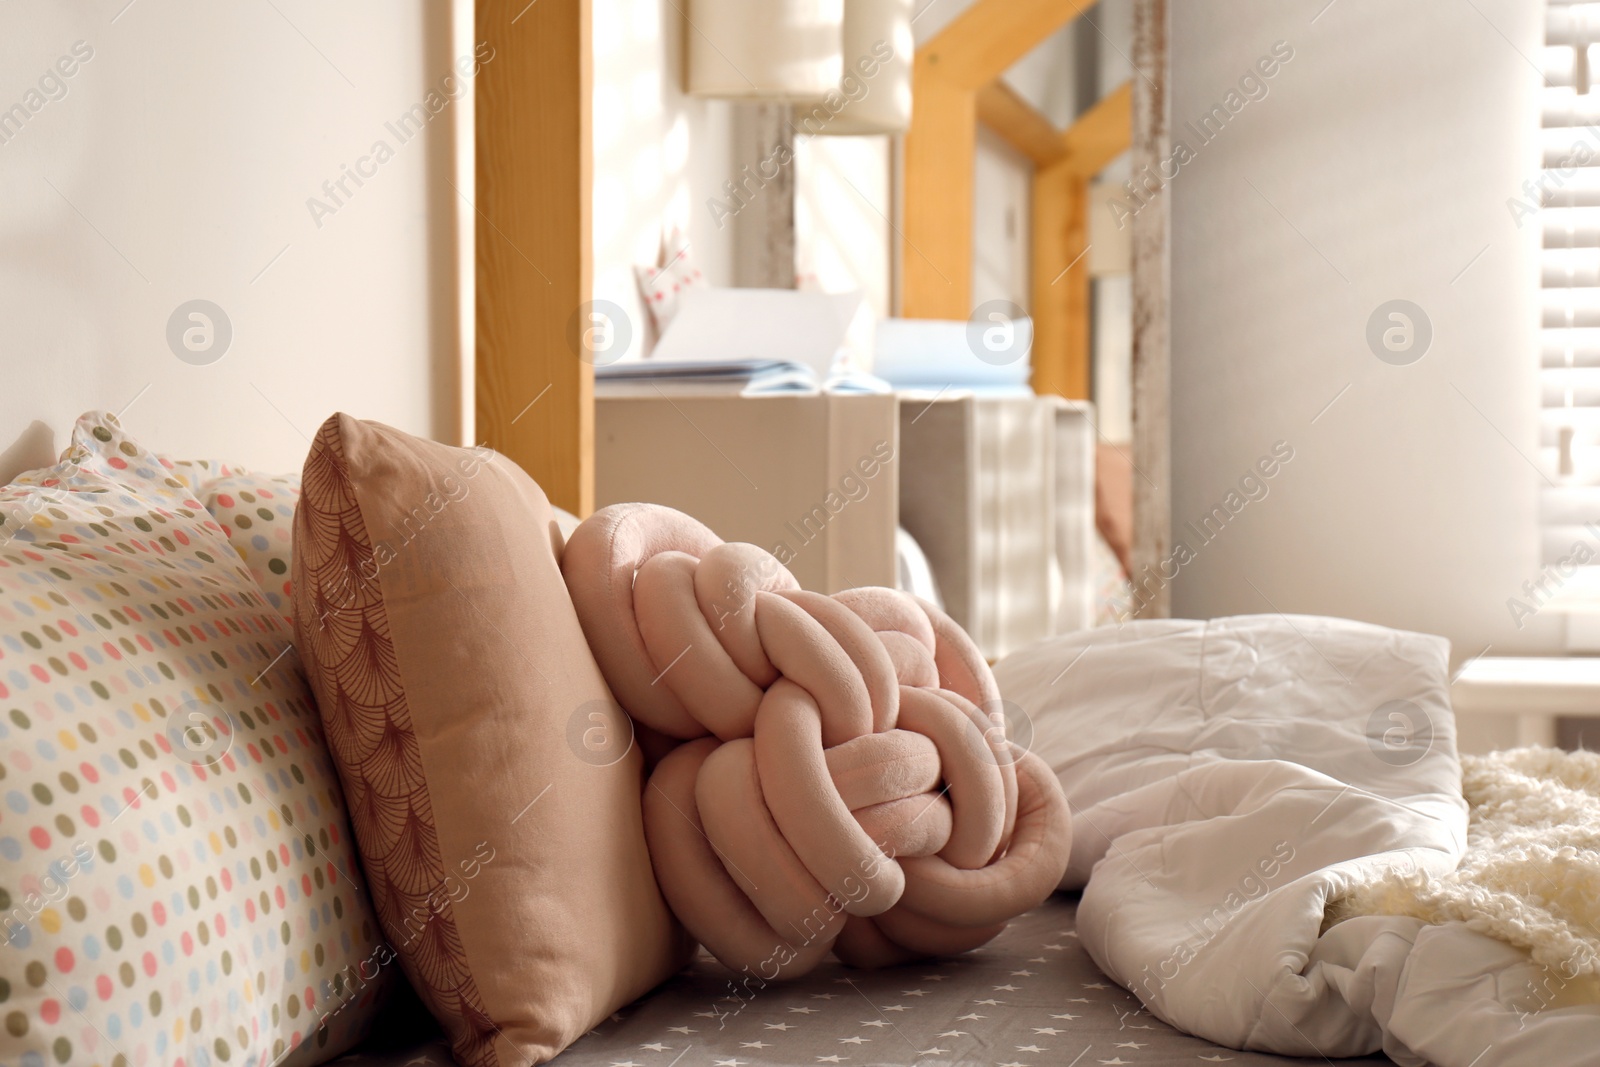 Photo of Soft pillows on bed in cozy room interior